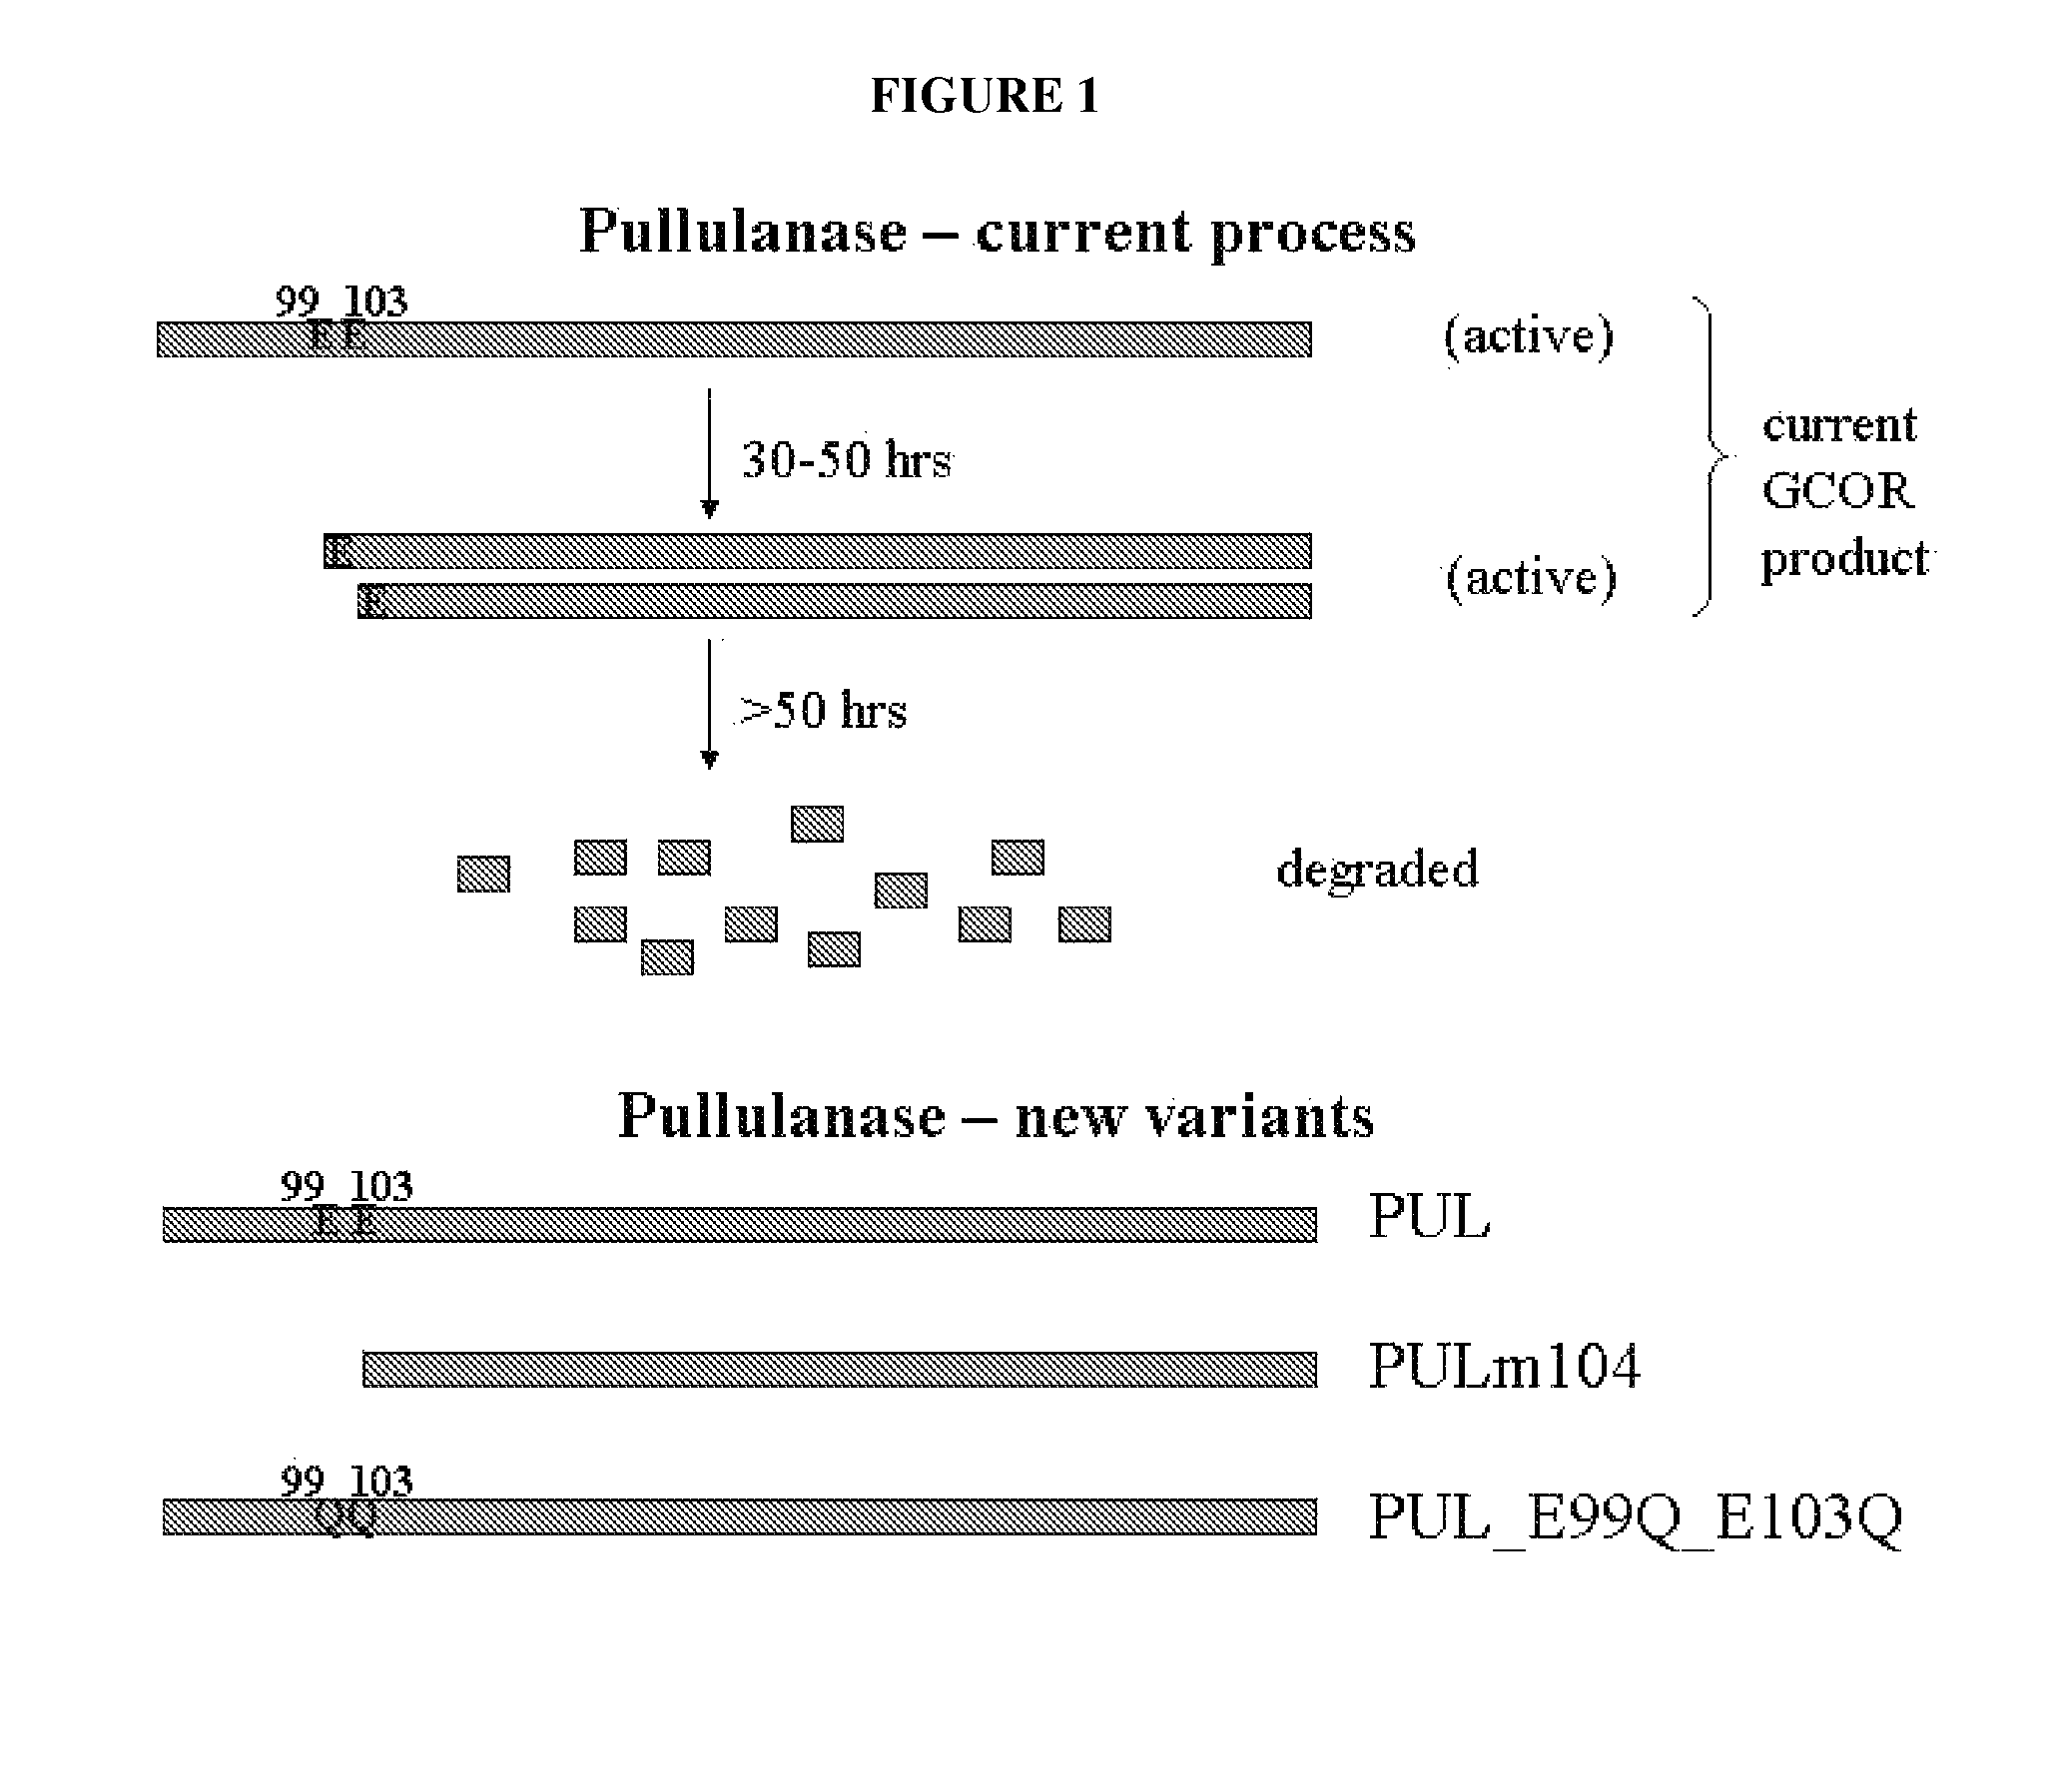 Pullulanase variants with increased productivity